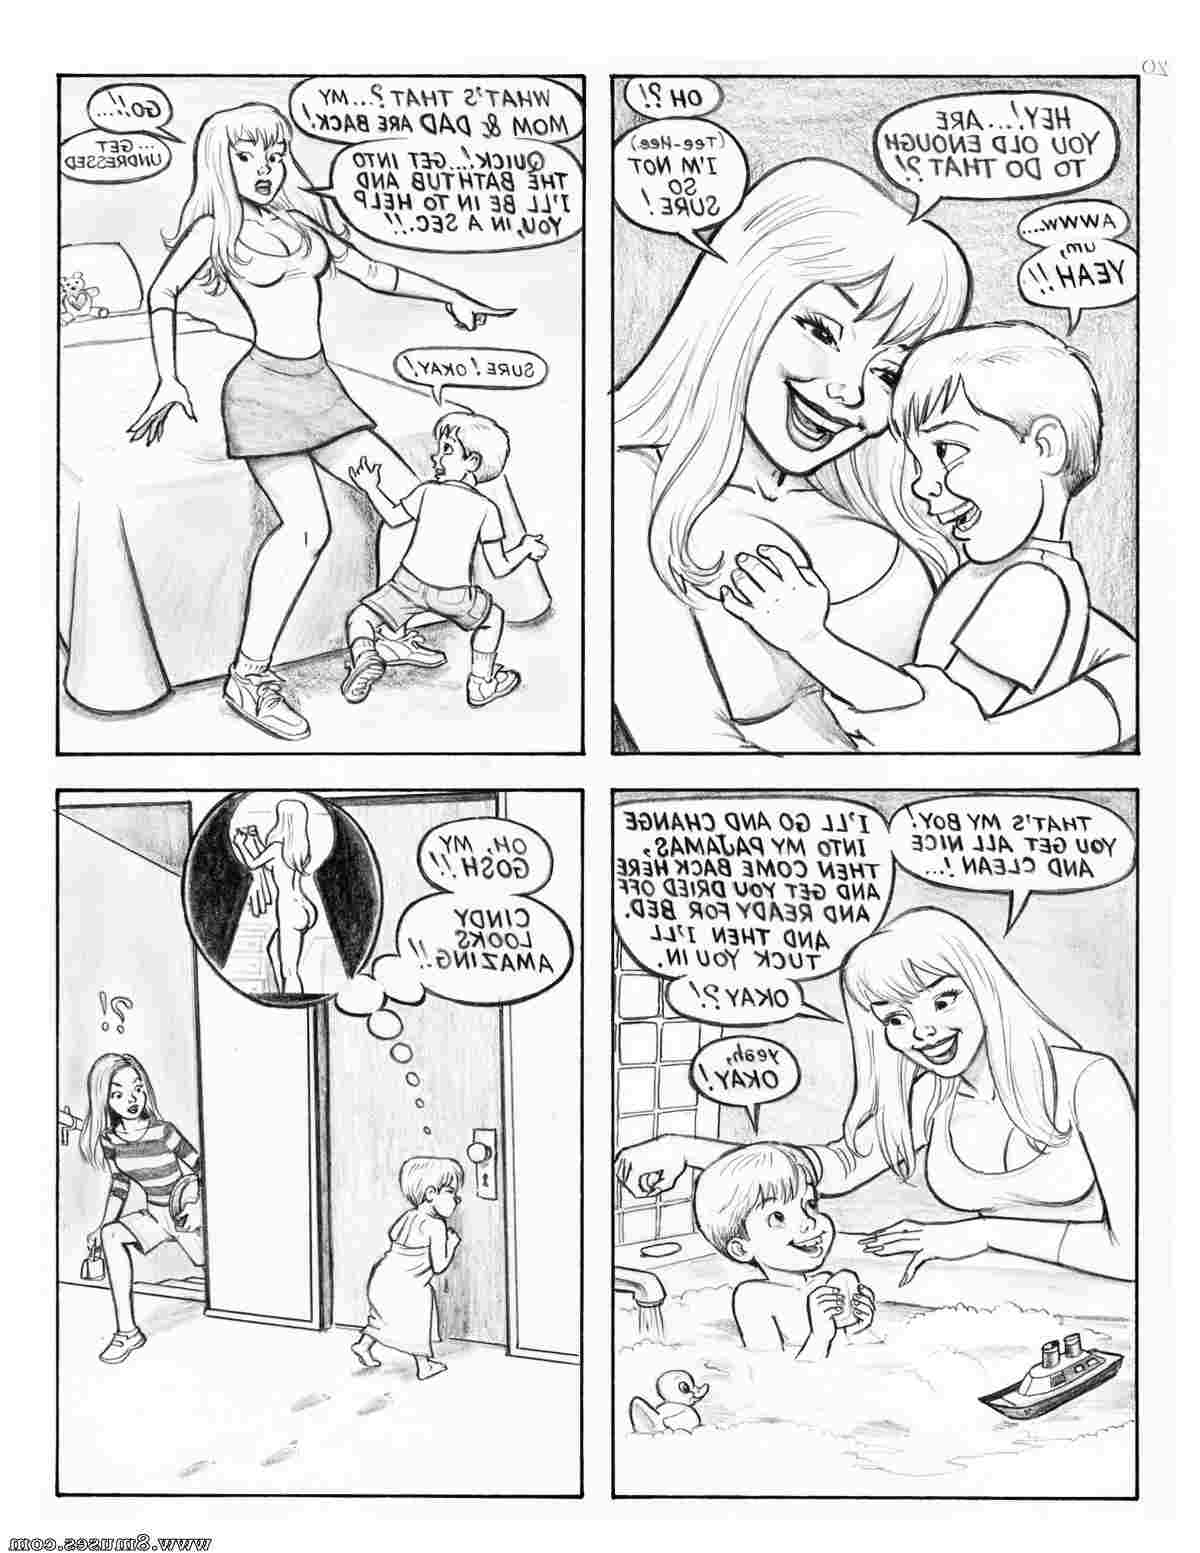 DreamTales-Comics/Something-in-The-Water Something_in_The_Water__8muses_-_Sex_and_Porn_Comics_24.jpg